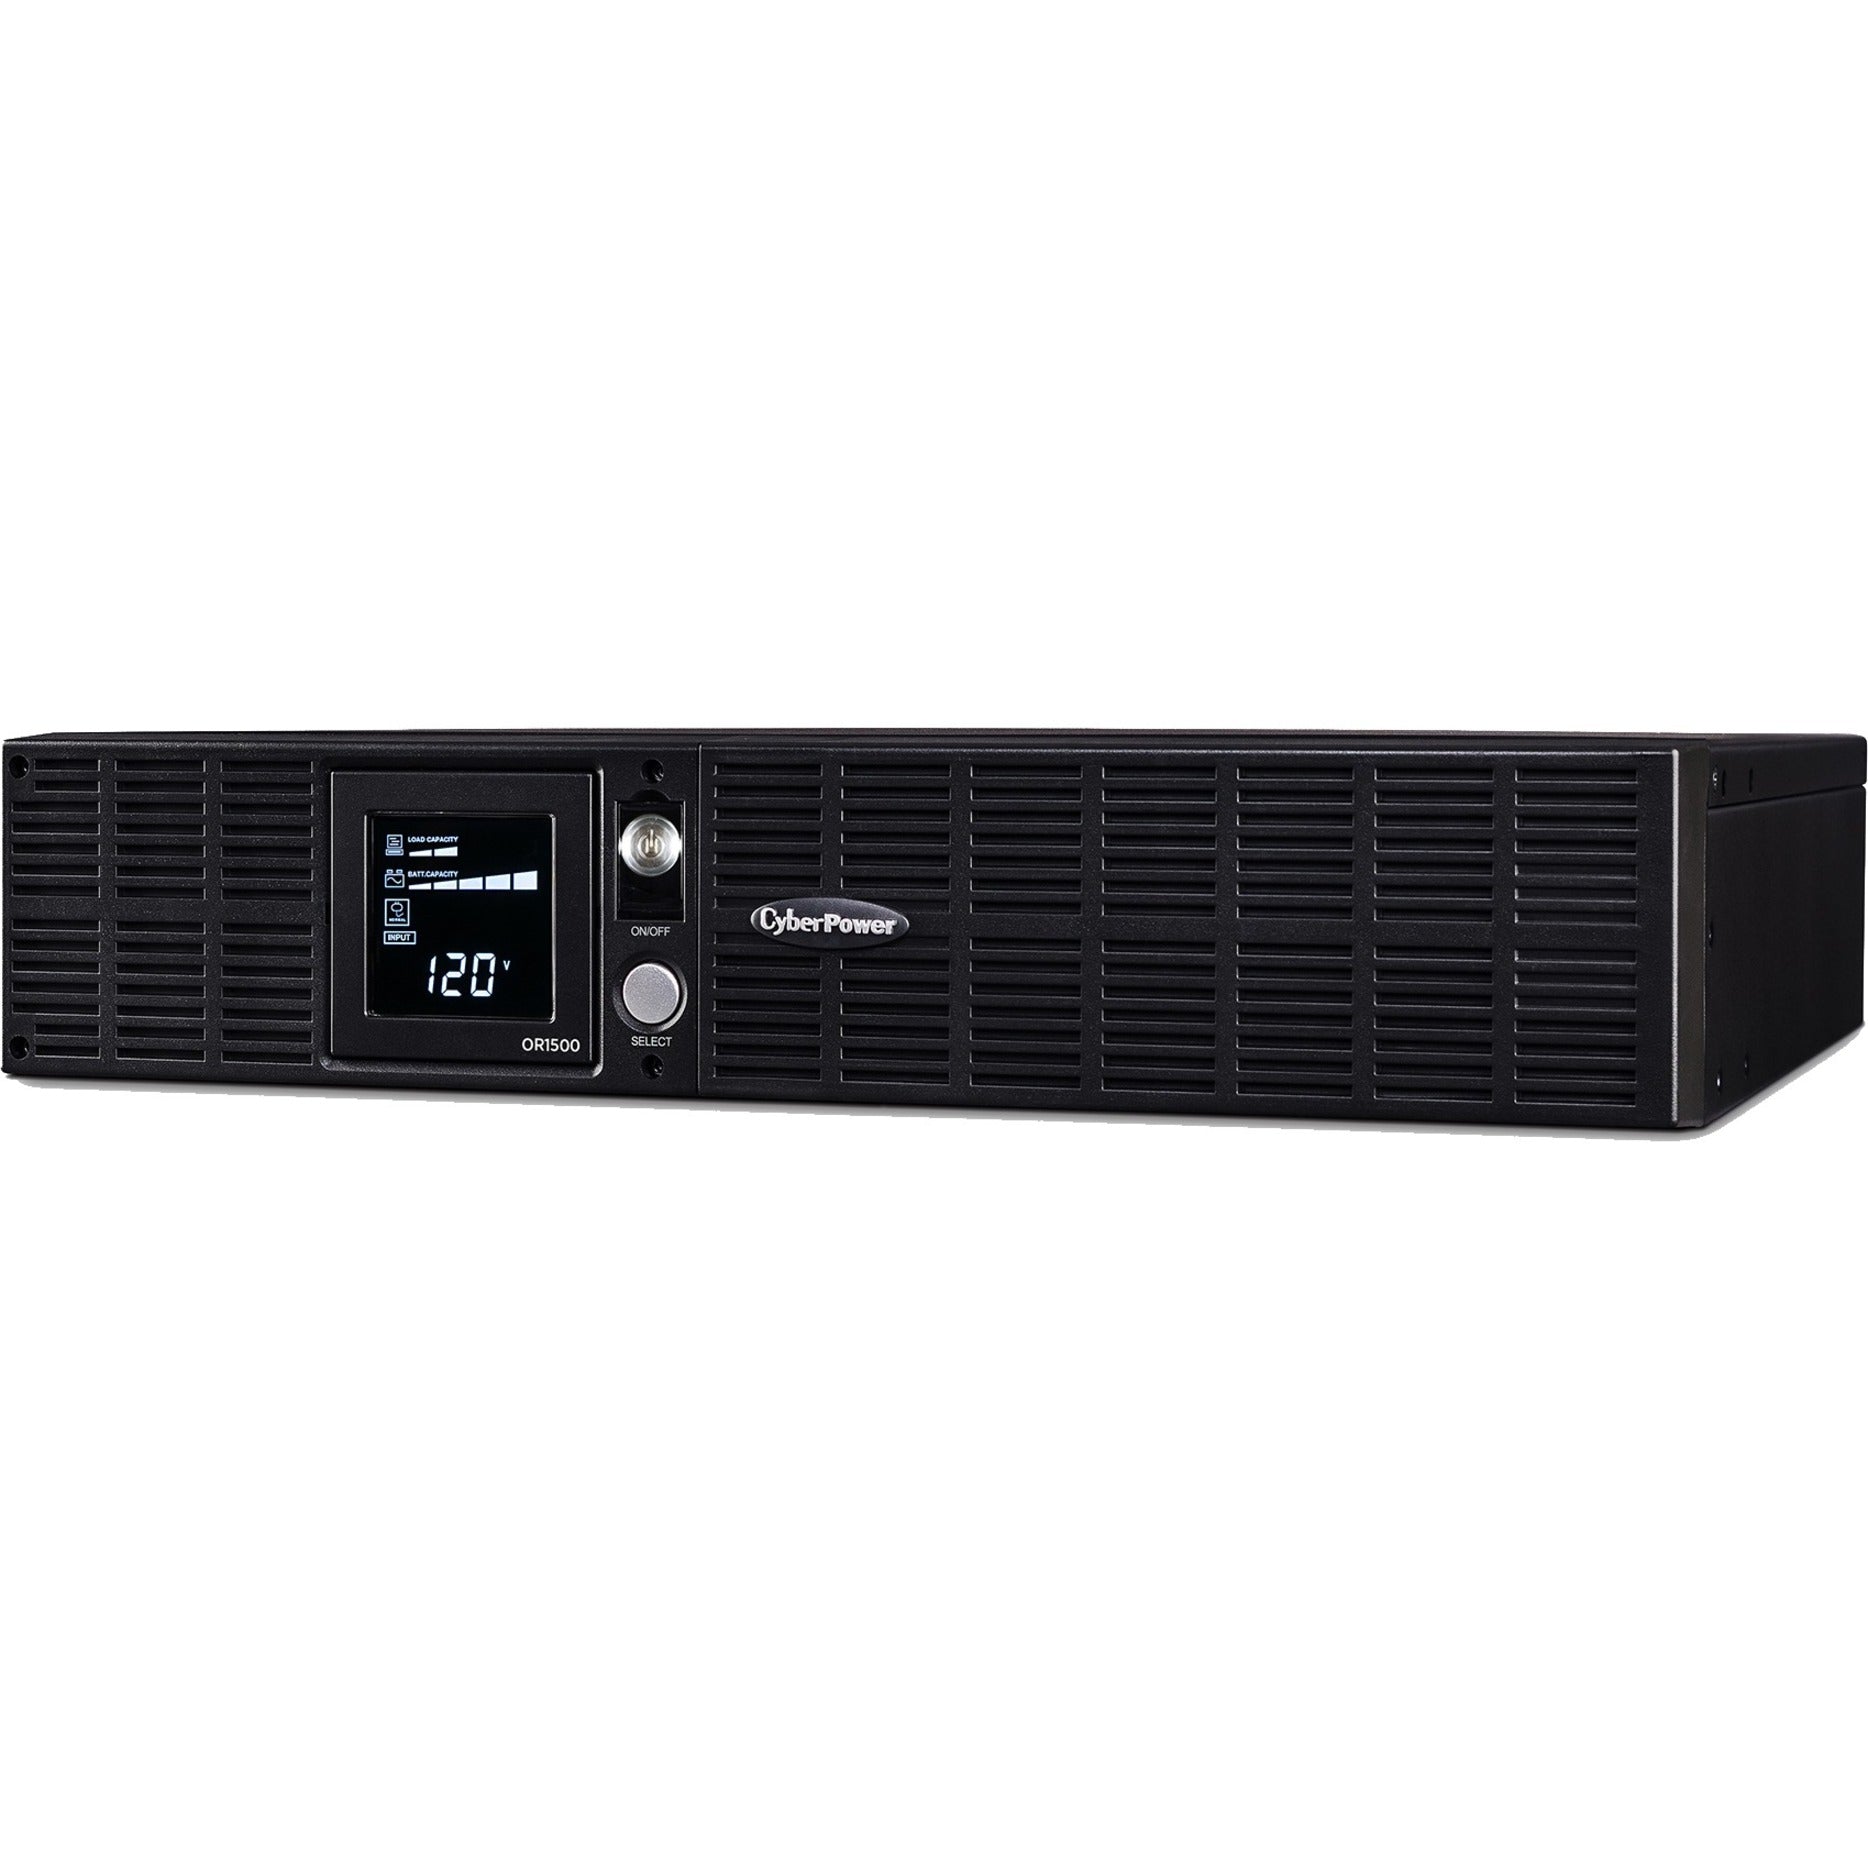 CyberPower OR1500LCDRT2U Smart App LCD UPS Systems, 1500VA, 8 Outlets, Energy Star Certified